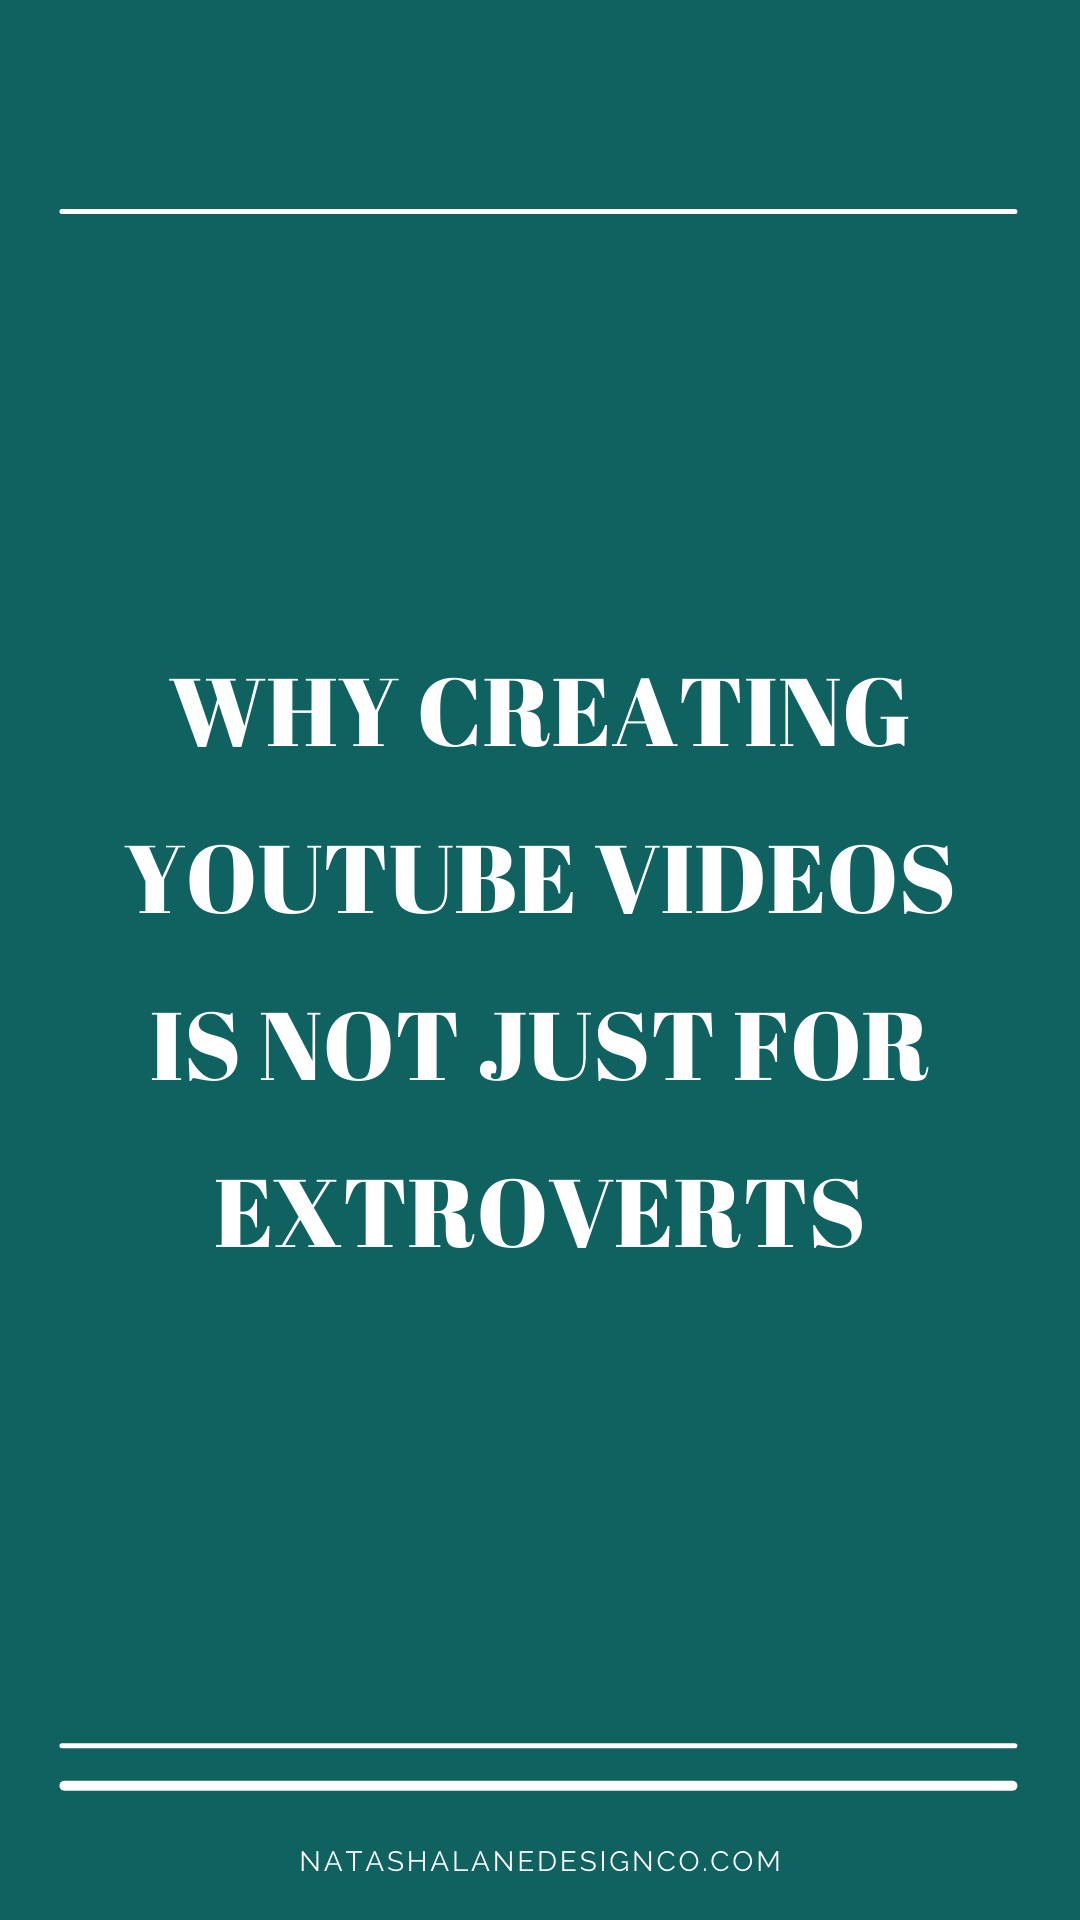 introvert? You can still create videos